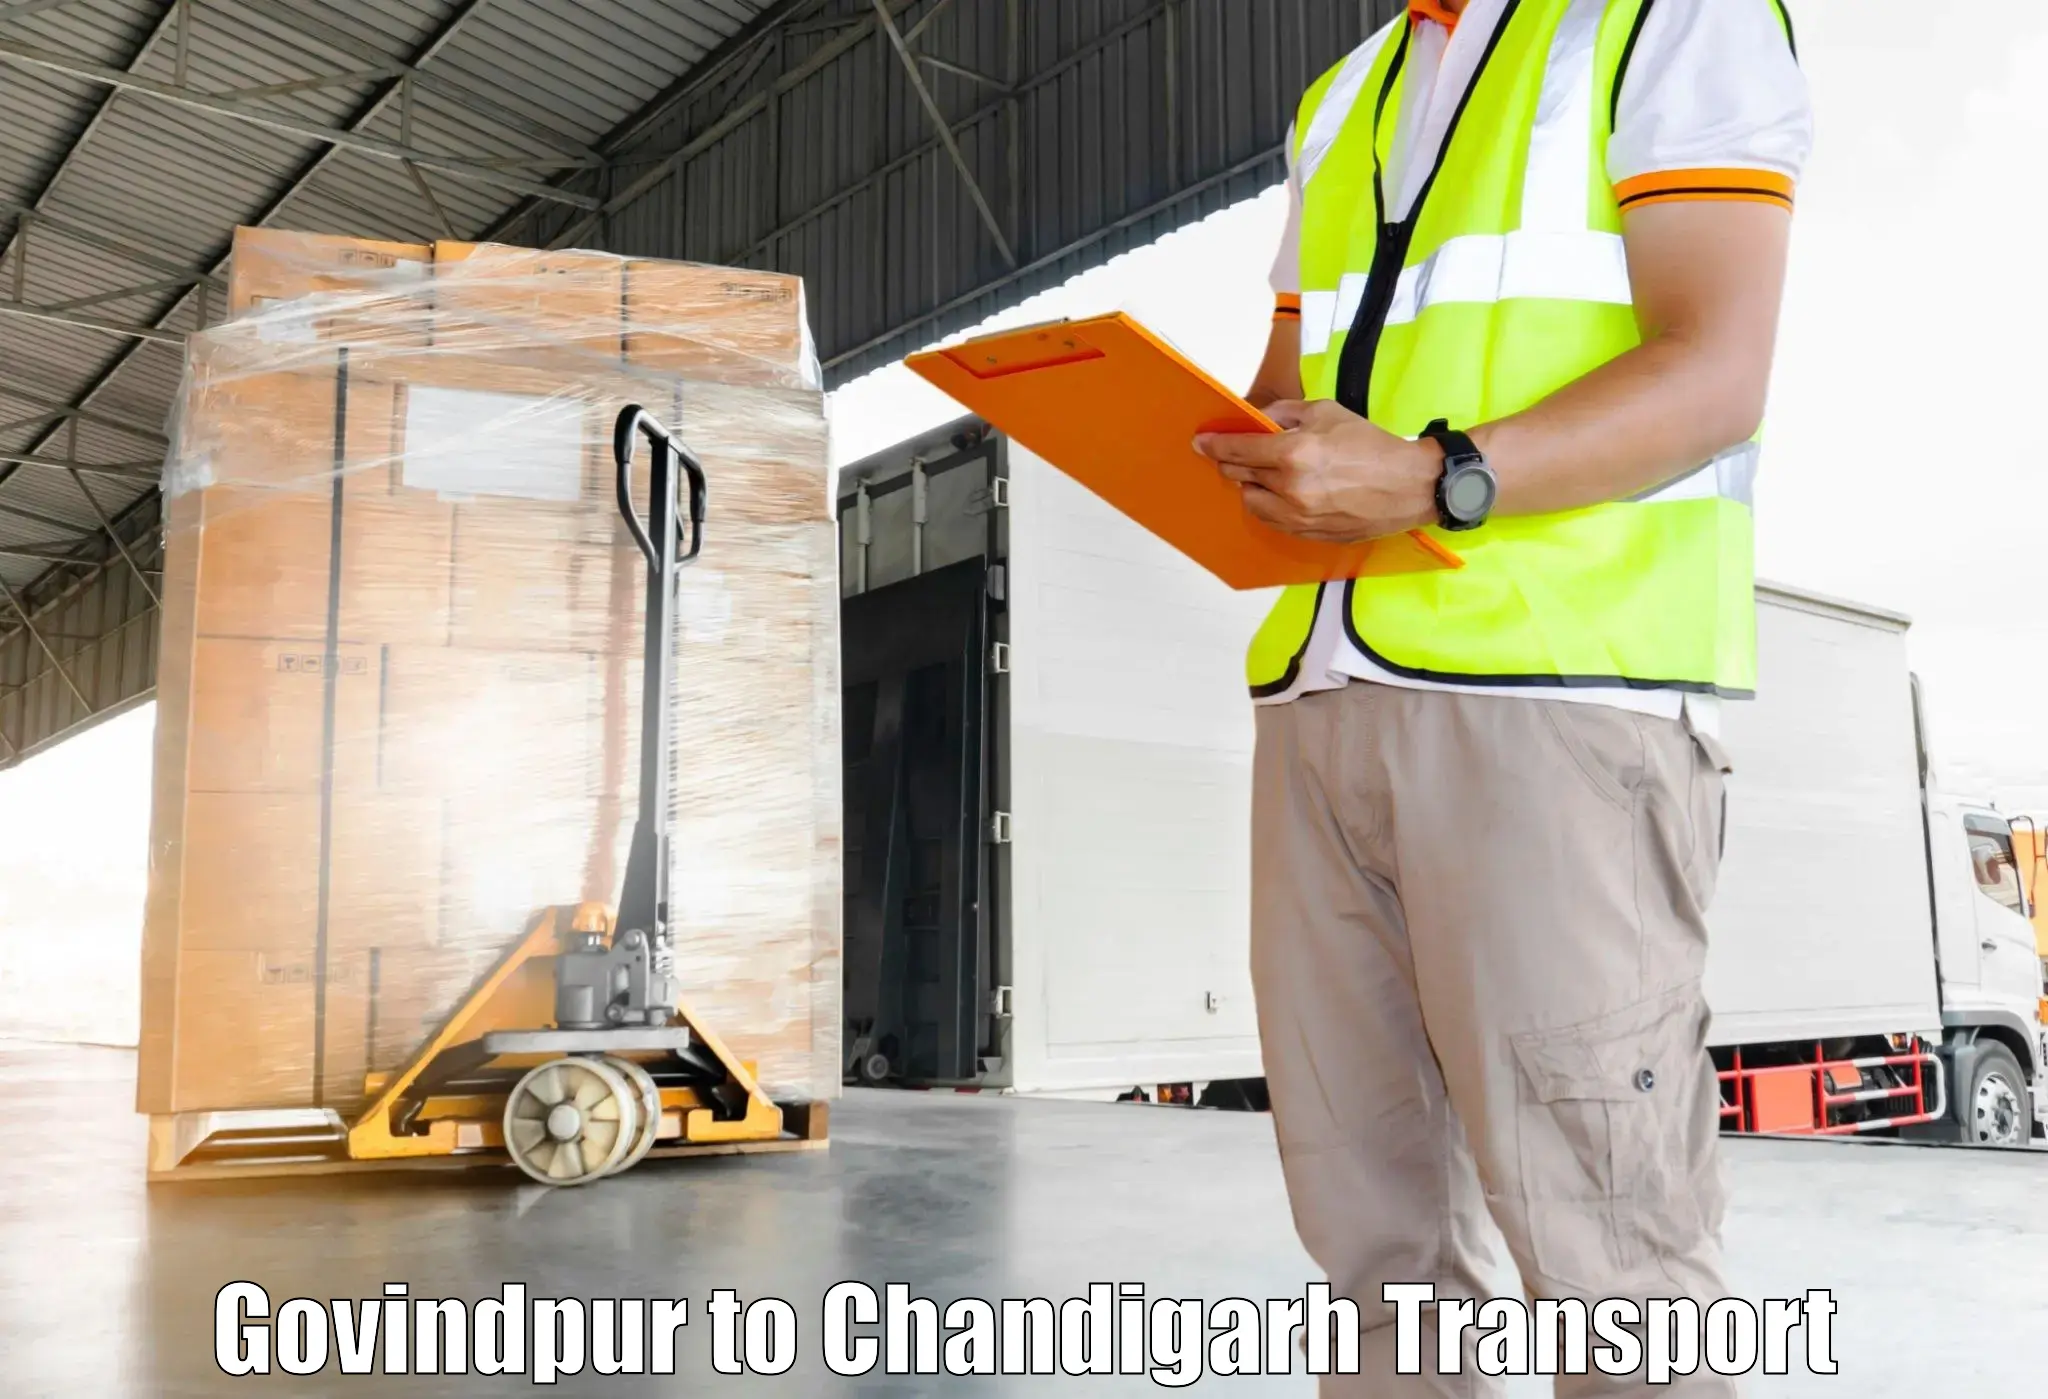 Transport bike from one state to another Govindpur to Chandigarh